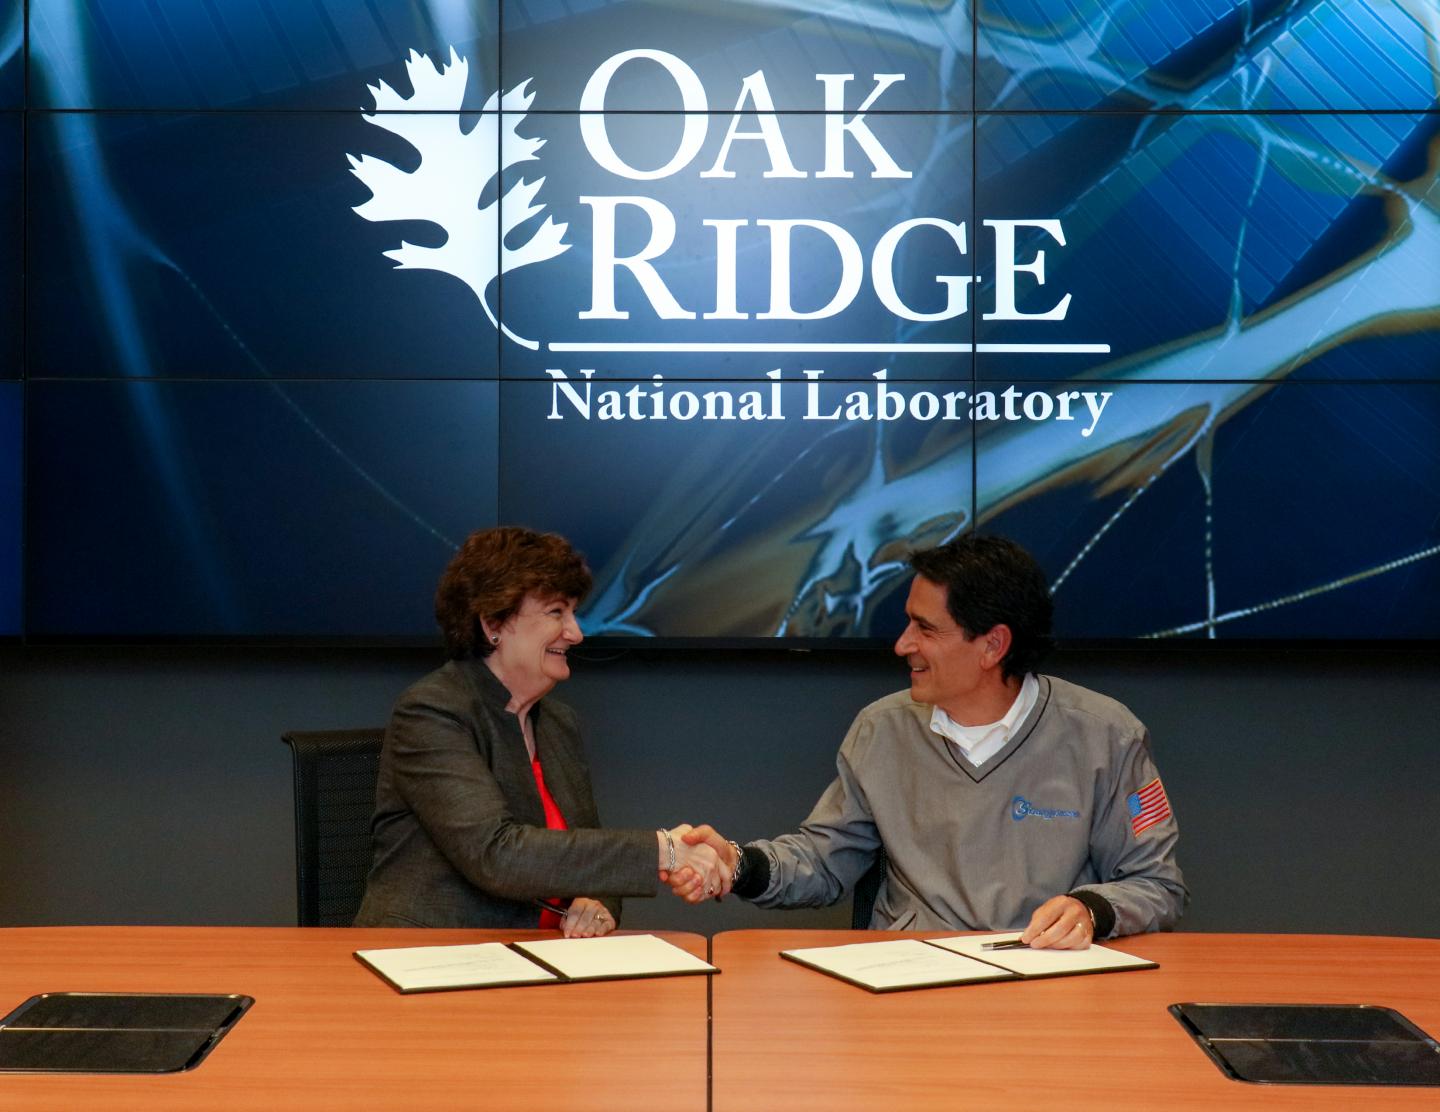 Strangpresse Exclusively Licenses ORNL Extruder Tech for High-volume Additive Manufacturing (1 of 2)